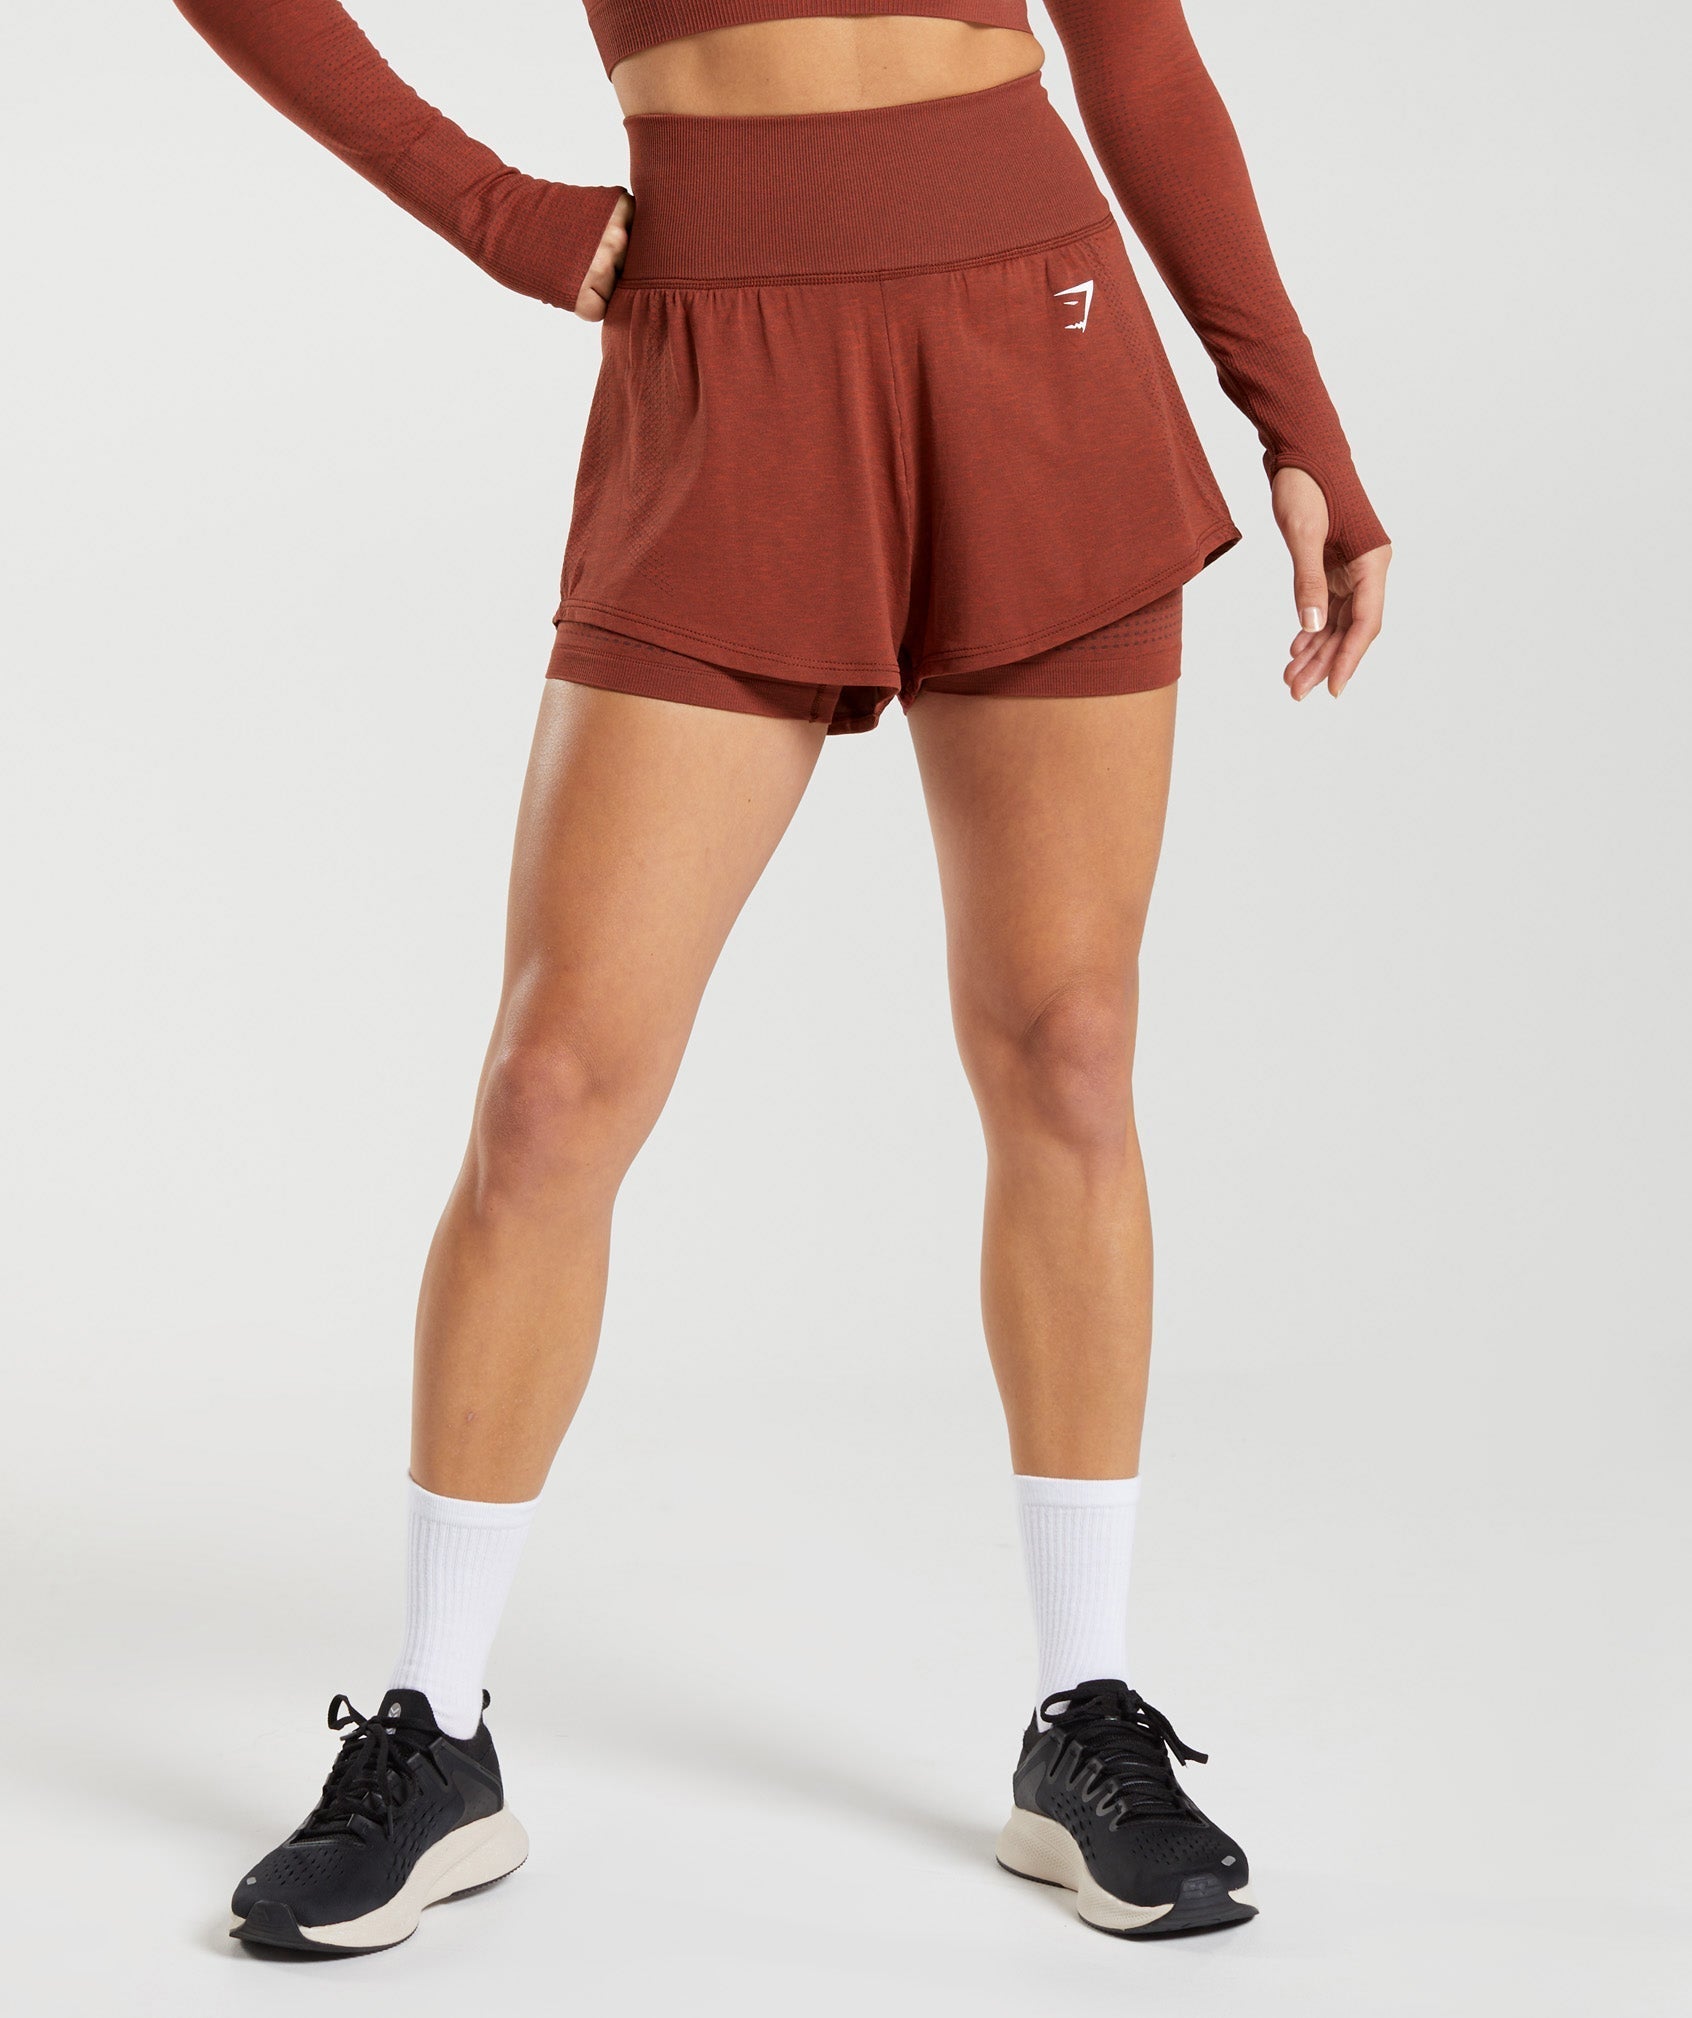 Vital Seamless 2.0 2-in-1 Shorts in Brick Red Marl